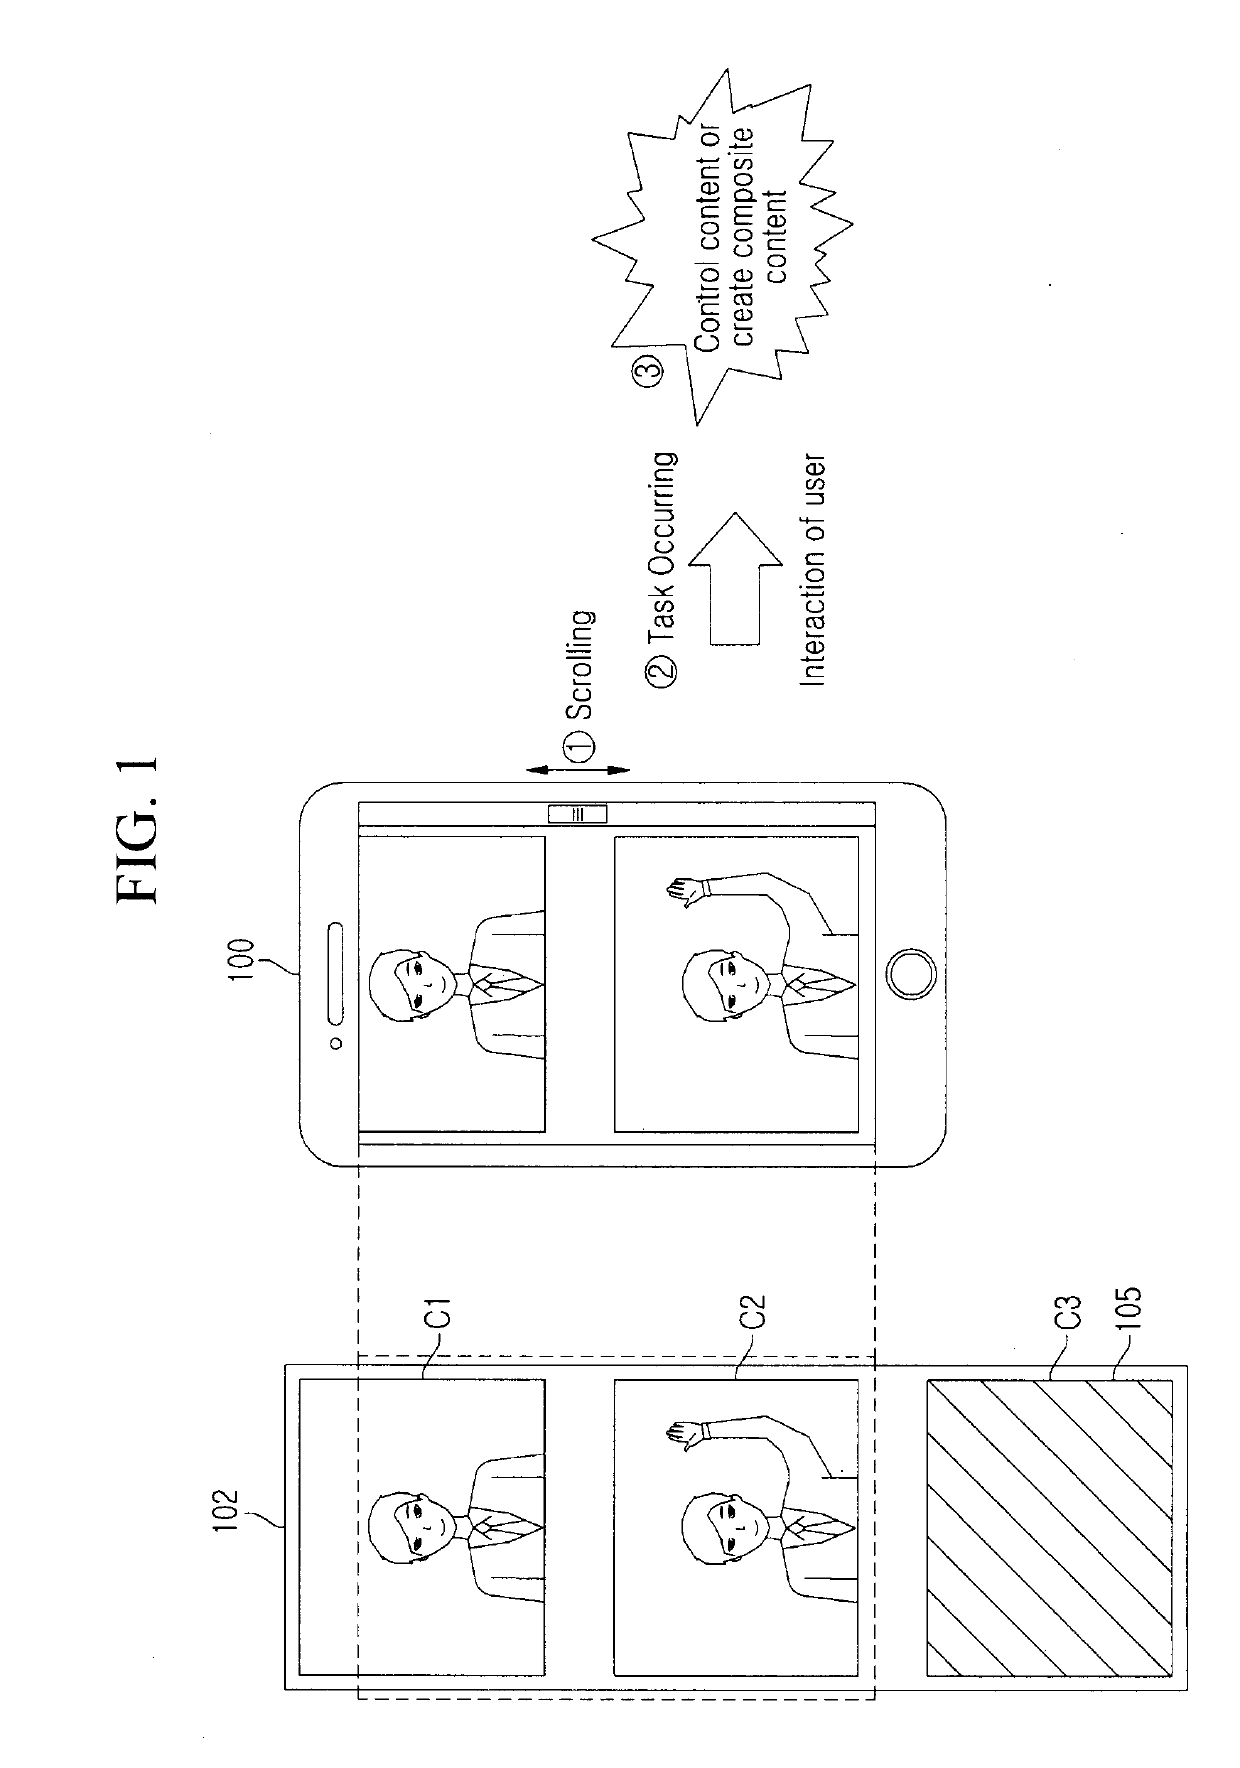 Method and apparatus for providing contents controlled or synthesized based on interaction of user